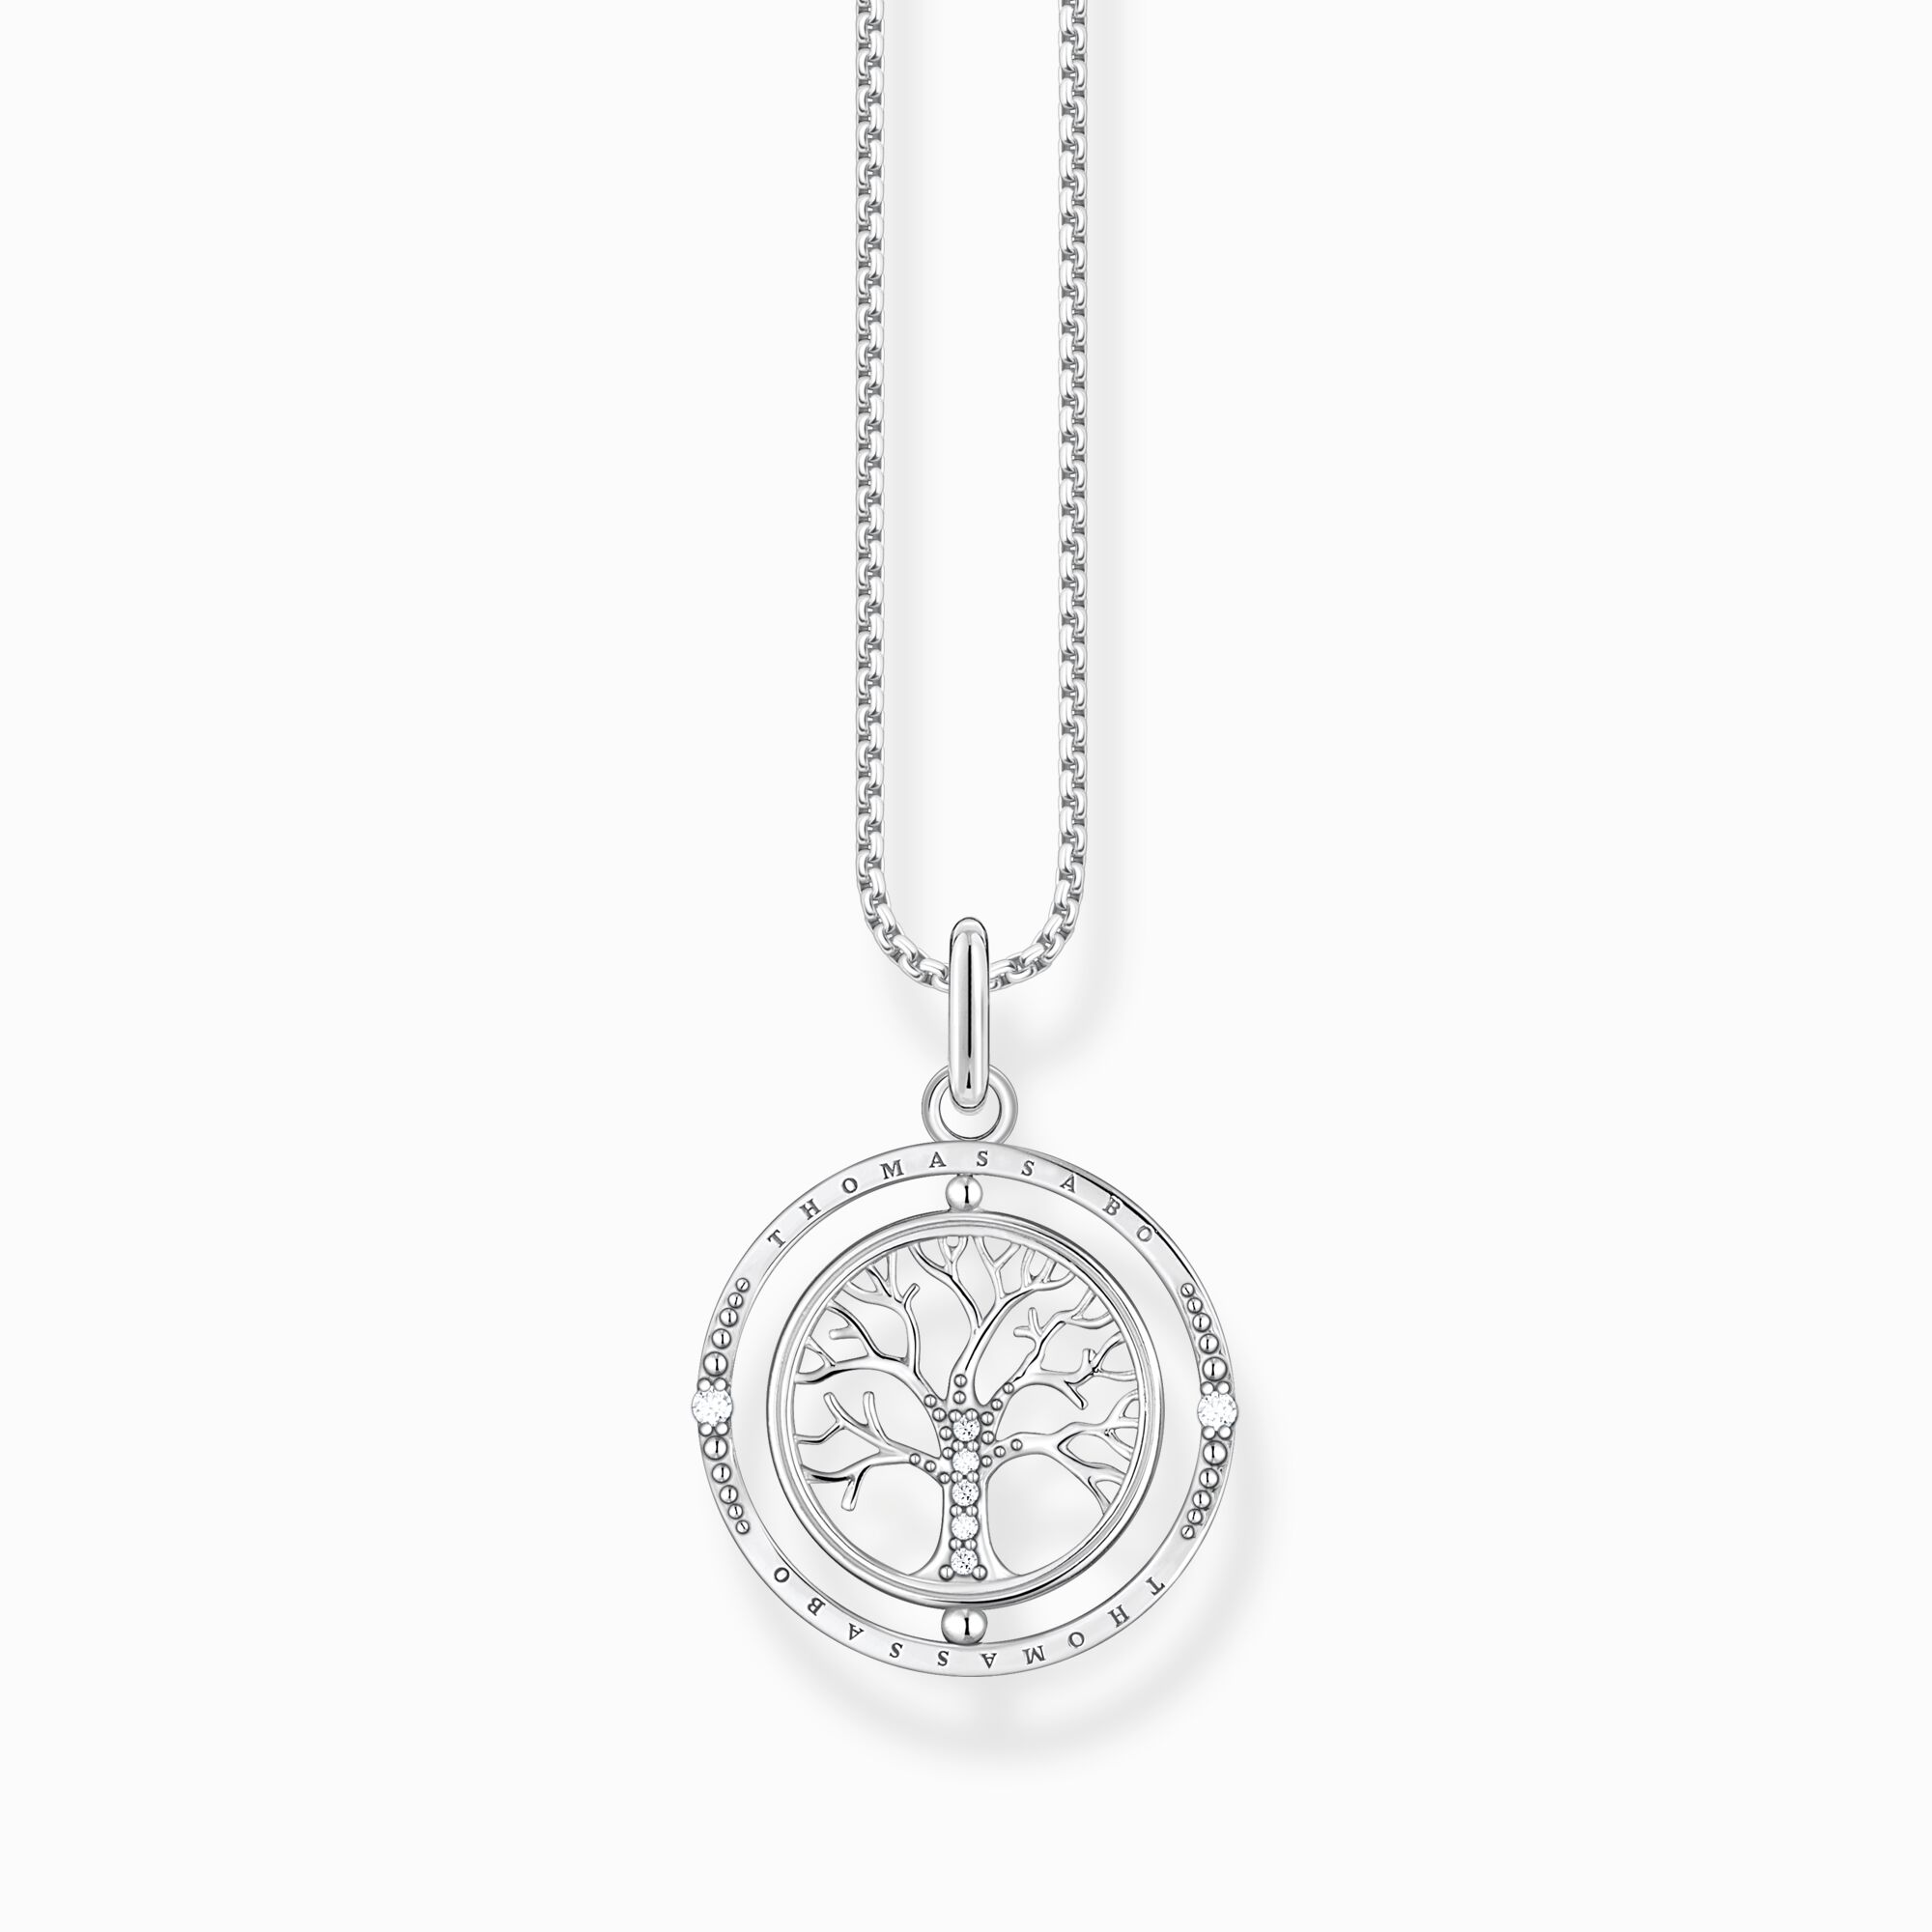 Thomas Sabo Sterling Silver Tree of Love Necklace